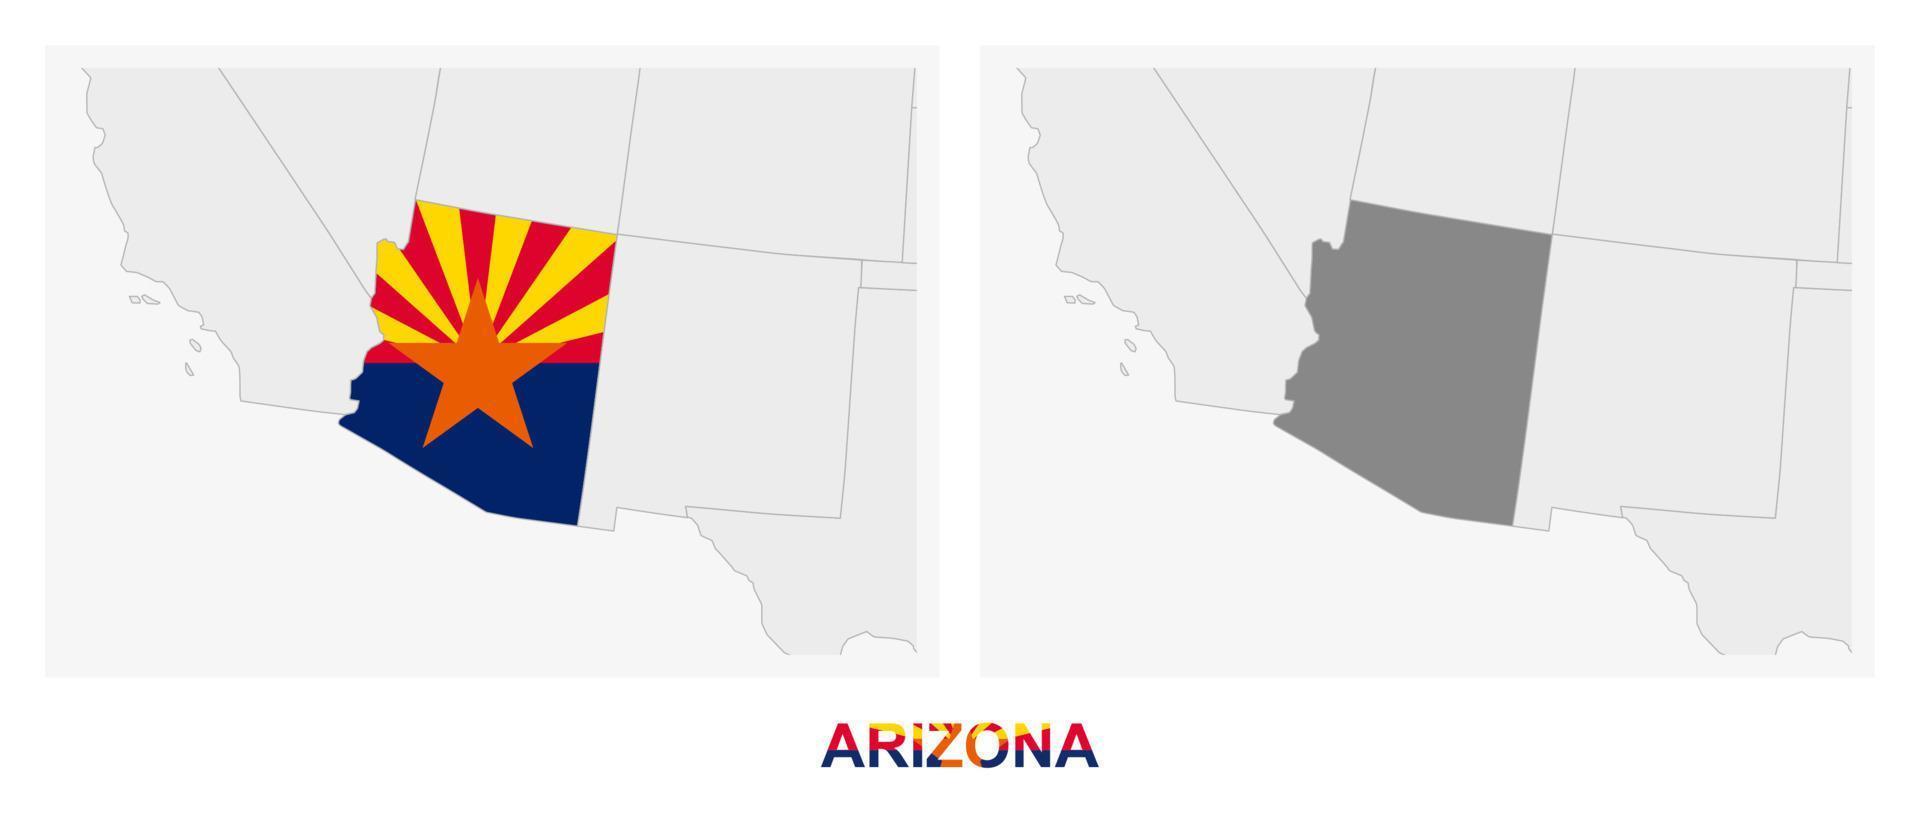 Two versions of the map of US State Arizona, with the flag of Arizona and highlighted in dark grey. vector